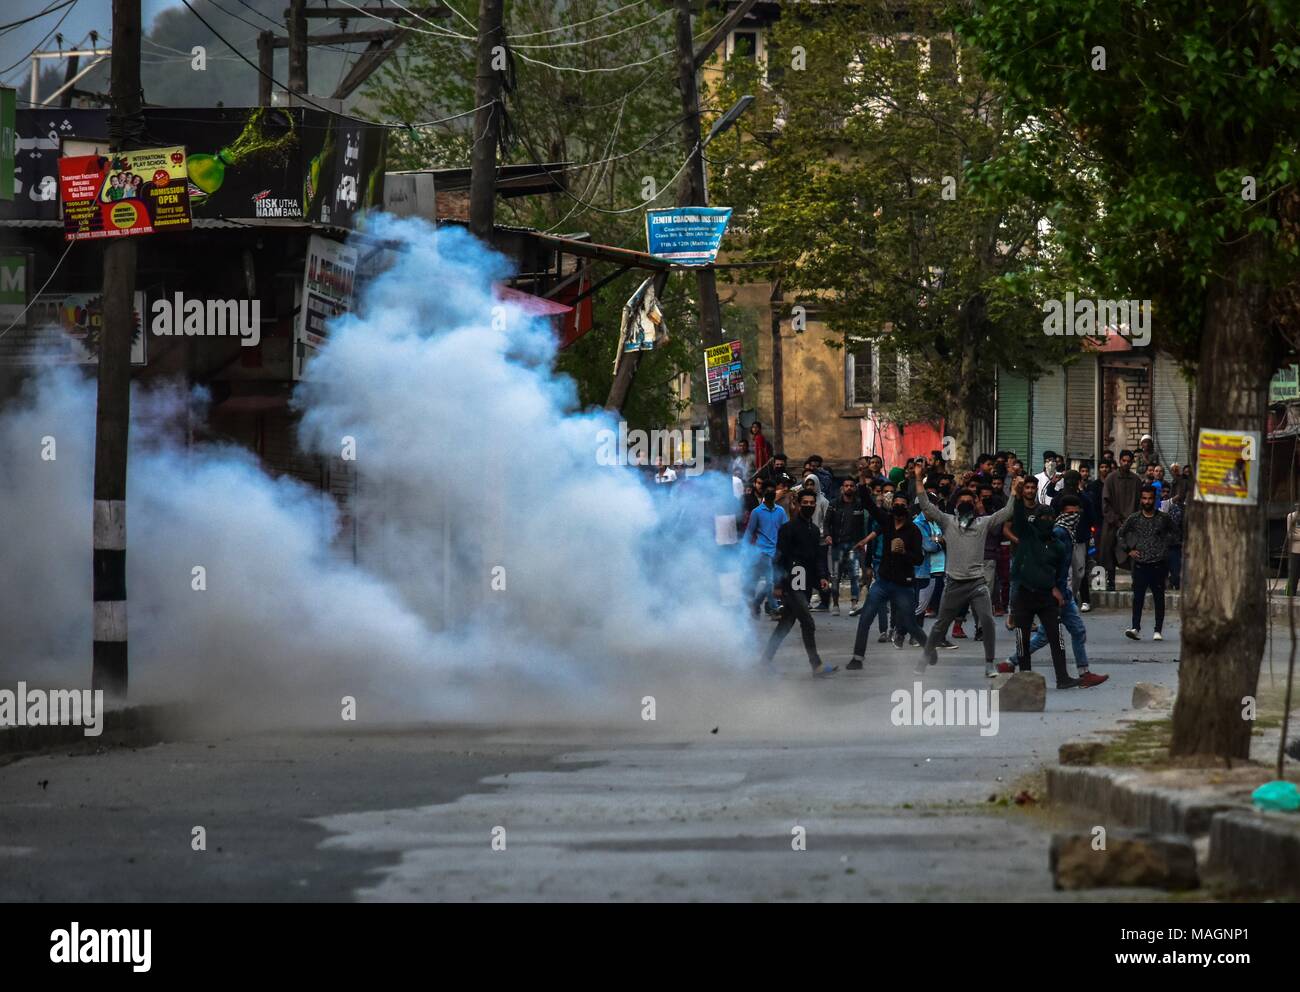 Srinagar, India. 2nd Apr, 2018. A tear gas shell fired by Indian policemen explodes near Kashmiri protesters during protest against the killings in separate encounters in South Kashmir in Srinagar, Indian administered Kashmir. As Muslim majority areas of Kashmir Monday observed complete shutdown to protest the killing of 4 civilians and 13 rebels in separate encounters in south Kashmir. Authorities imposed curfew in several areas to stop street protests. The call for shutdown was given by the separatist groups. Stone-pelting incidents were reported from some parts of the Kashmir valley. Mean Stock Photo